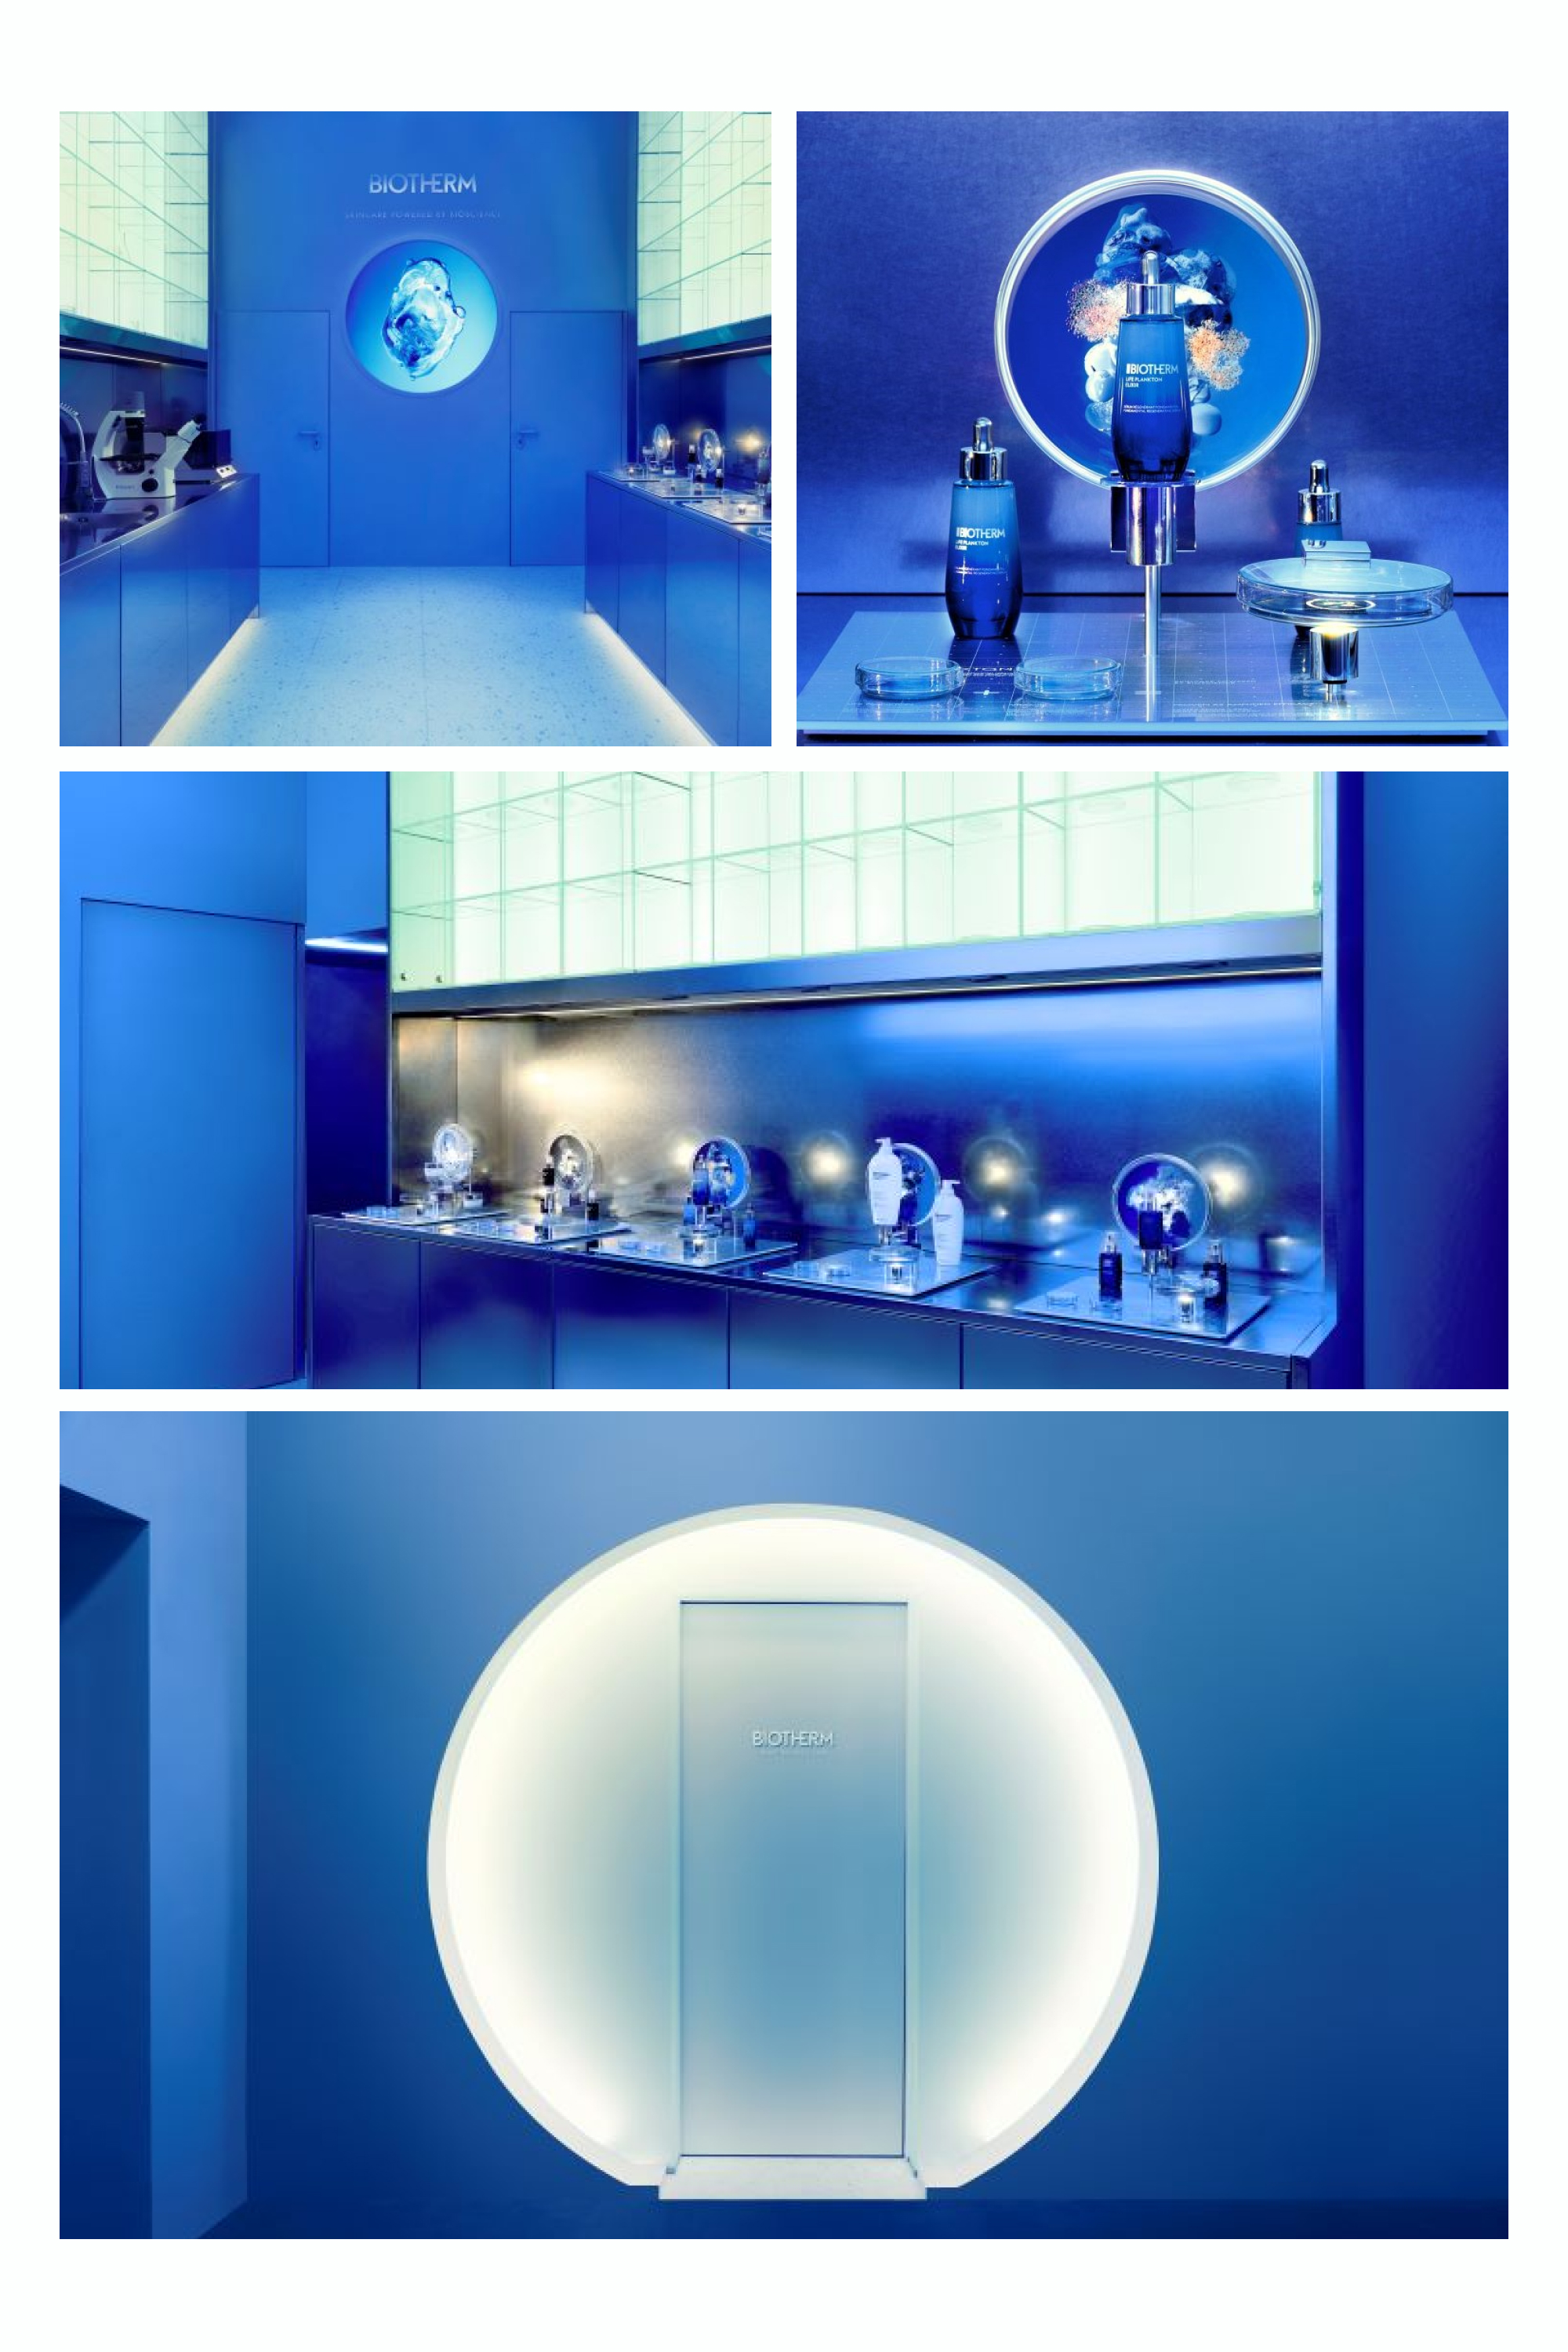 A collage of photographs of rooms illuminated by blue light and with round objects.